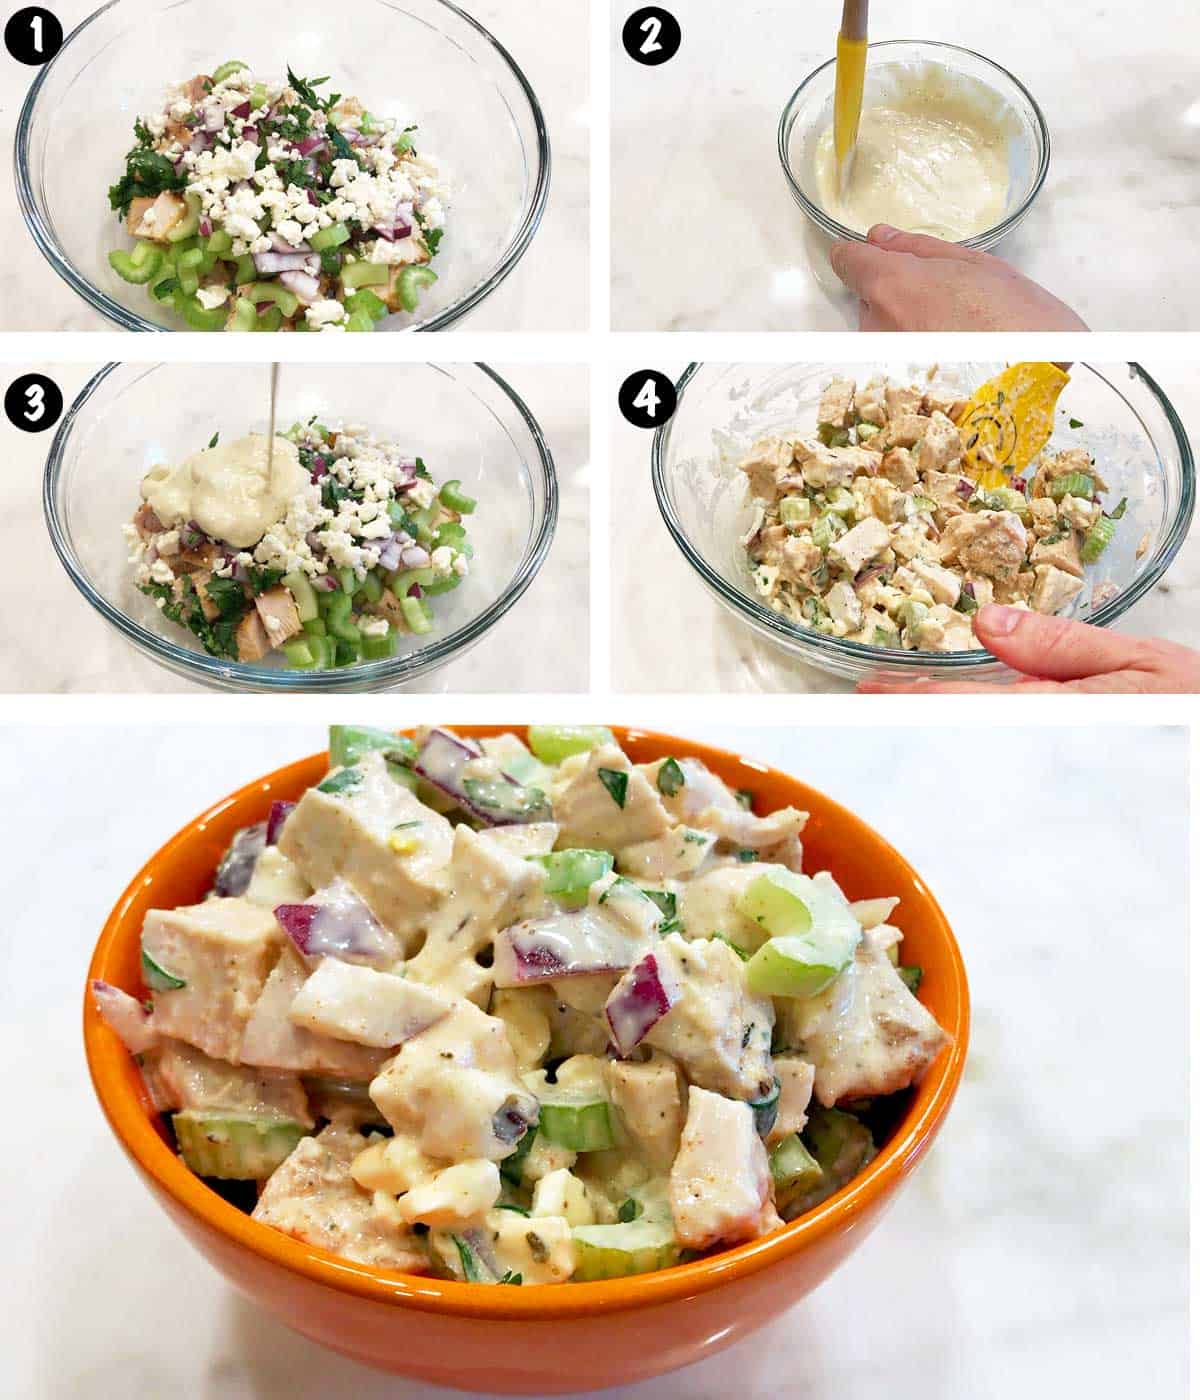 A photo collage showing the steps for making a turkey salad. 